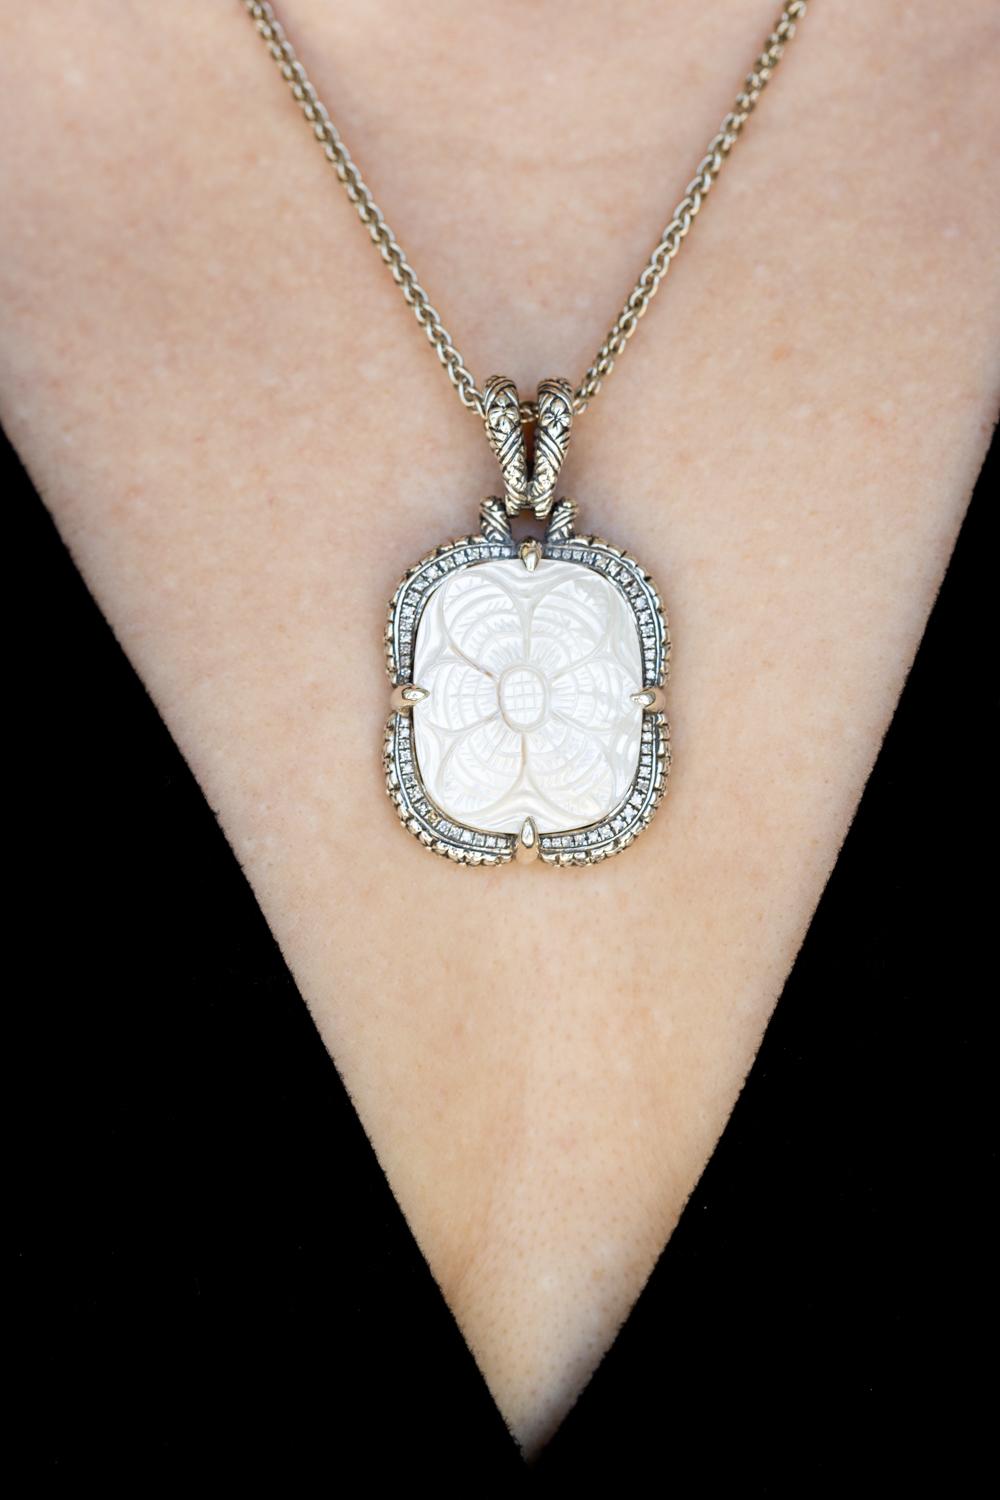 The hand-carved mother-of-pearl pendant necklace by Stephen Dweck is an exquisite example of fine craftsmanship. Set in sterling silver, the pendant features intricate carvings on the lustrous mother of pearl, which is beautifully complemented by a